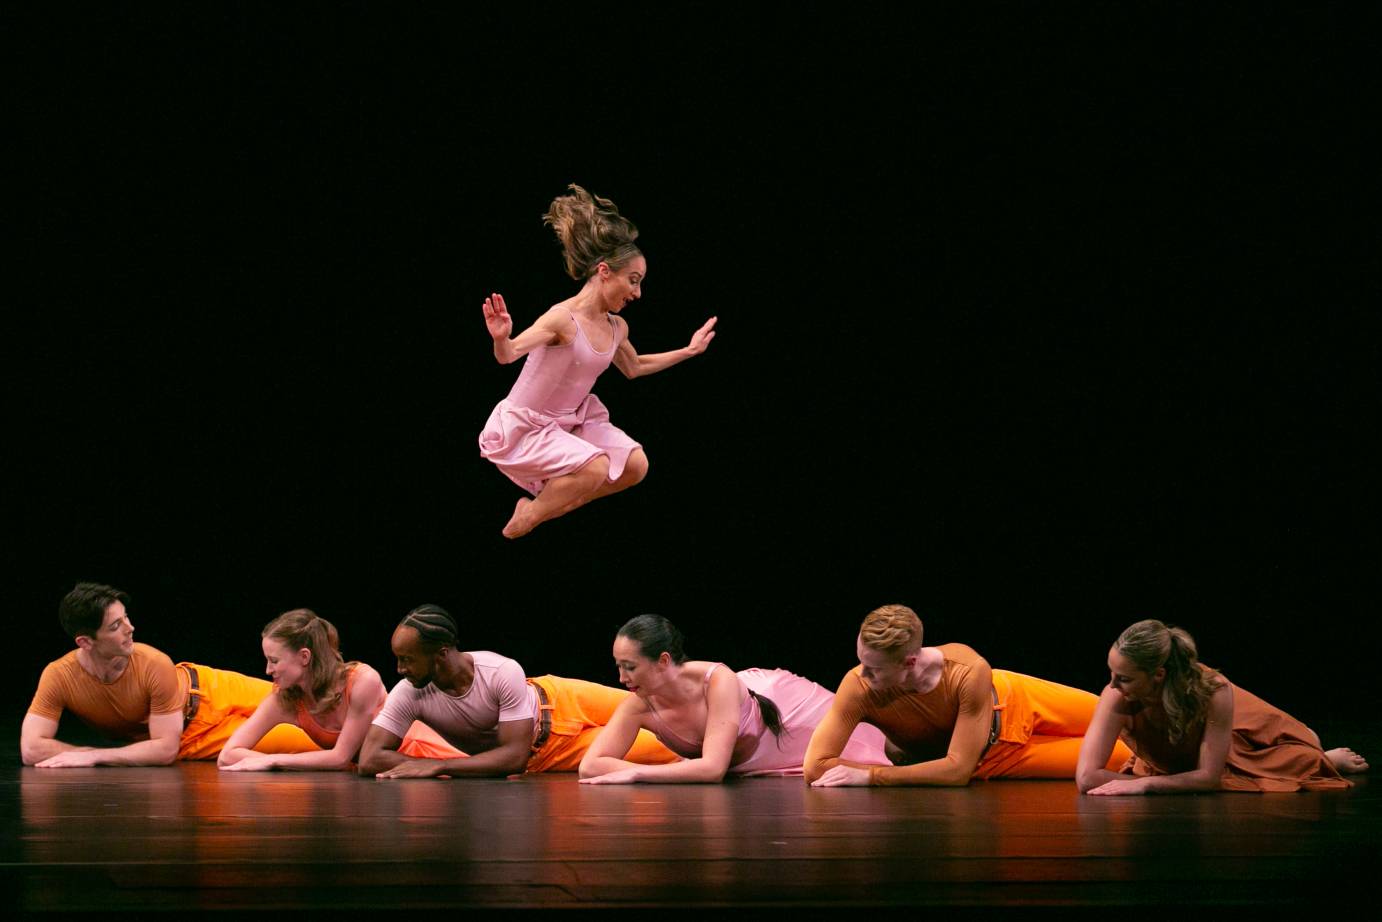 a woman in a pink dress joyously springs above a group of 6 dancers -men in orange and women in pink- lying on the floor. 